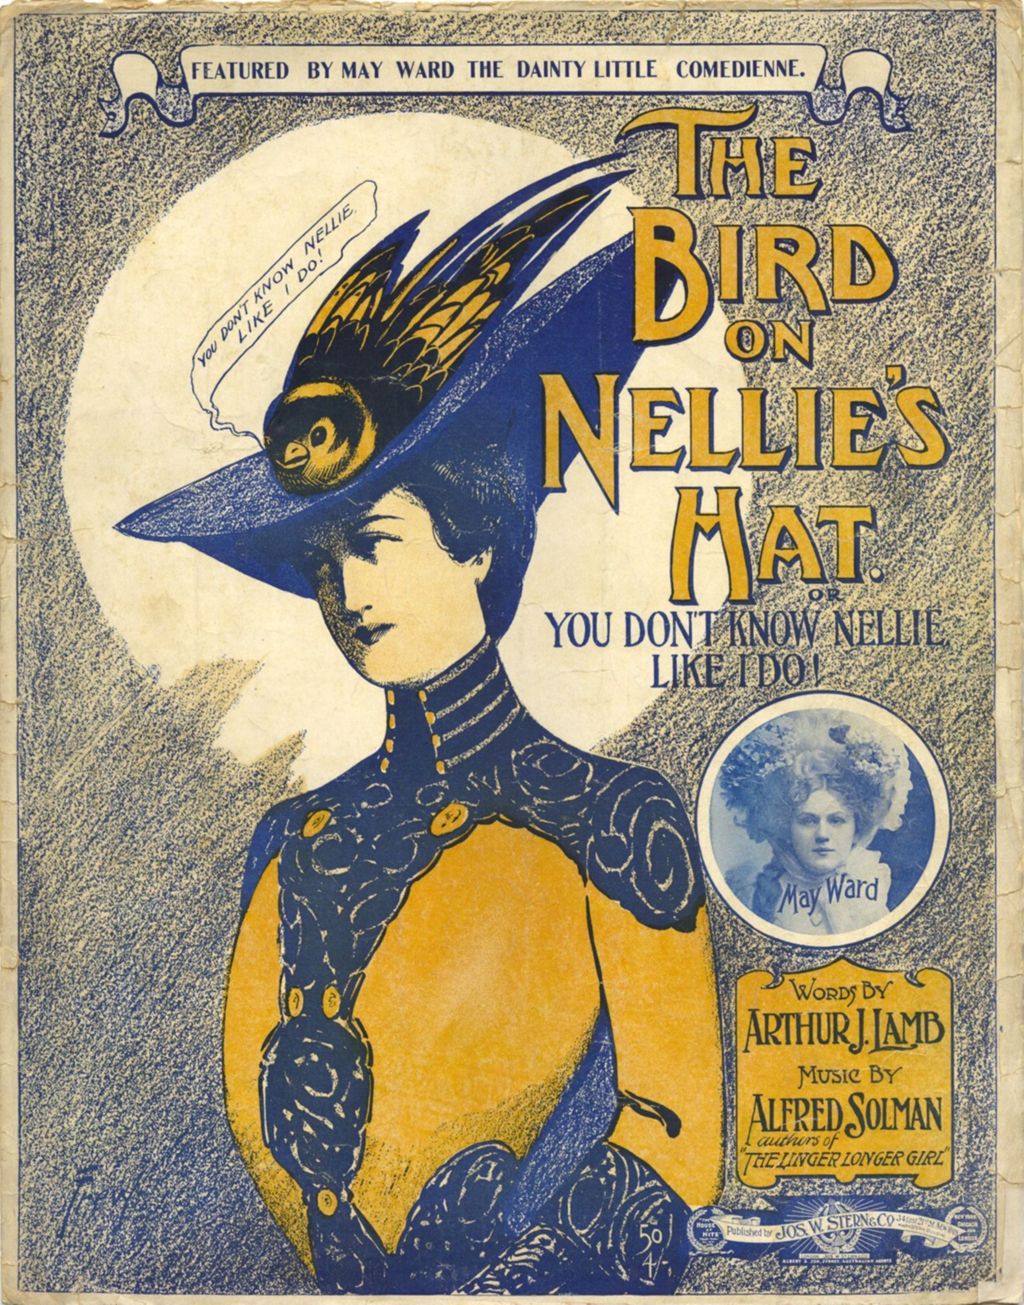 Bird on Nellie's Hat (You Don't Know Nellie Like I Do!)